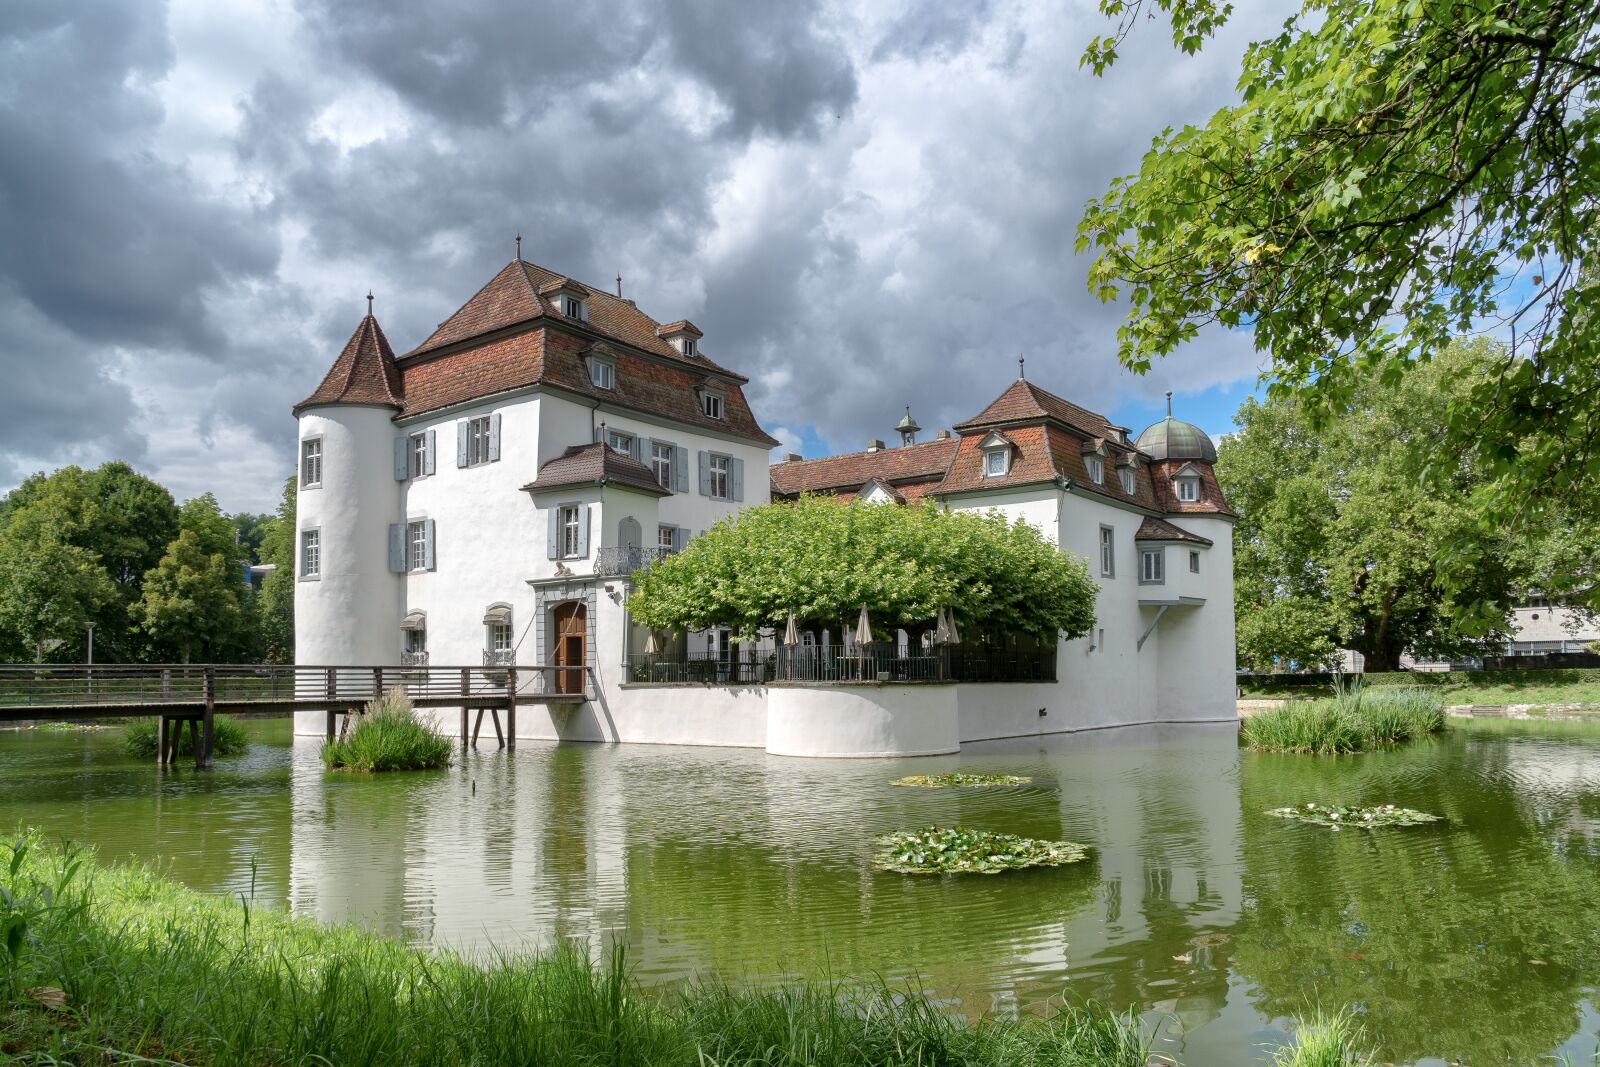 Sony a6500 sample photo. Water, moated castle, historically photography